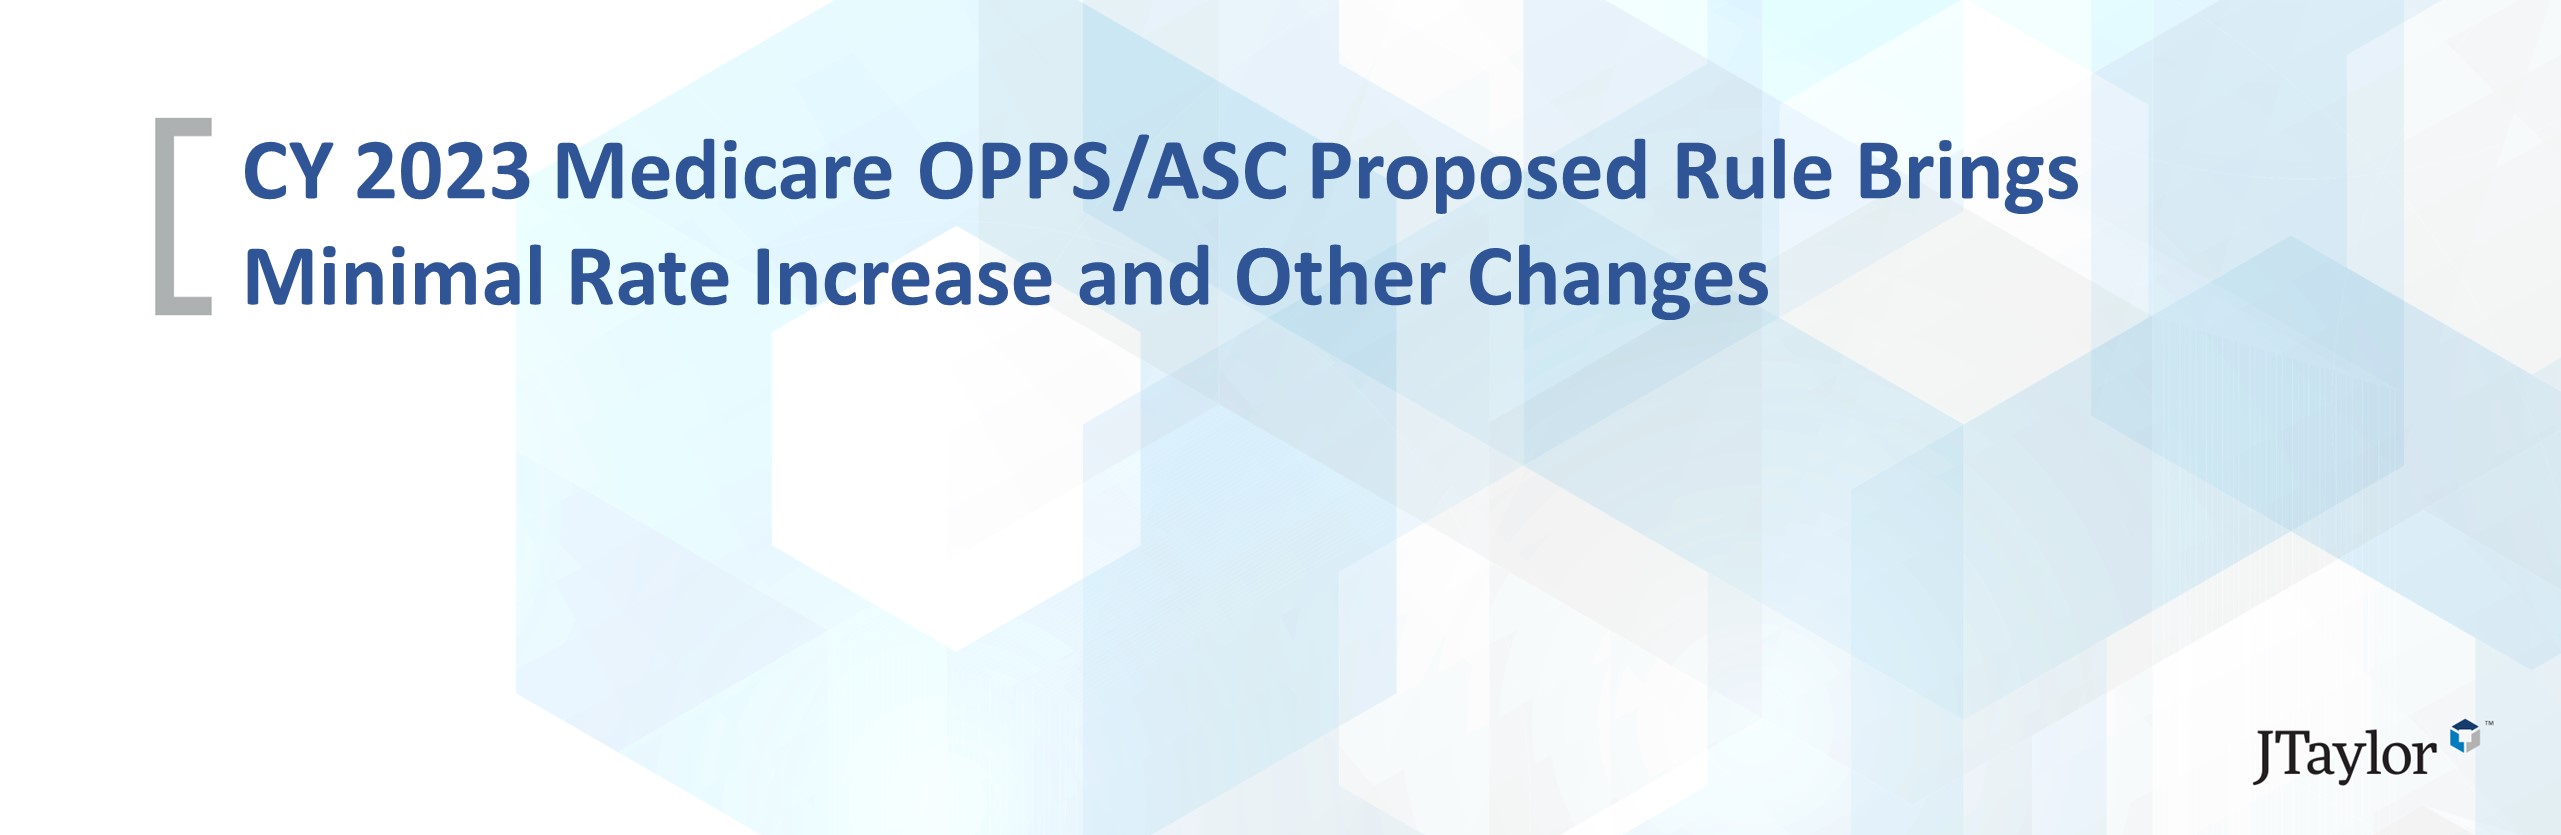 CY 2023 Medicare OPPS/ASC Proposed Rule Brings Minimal Rate Increase and Other Changes